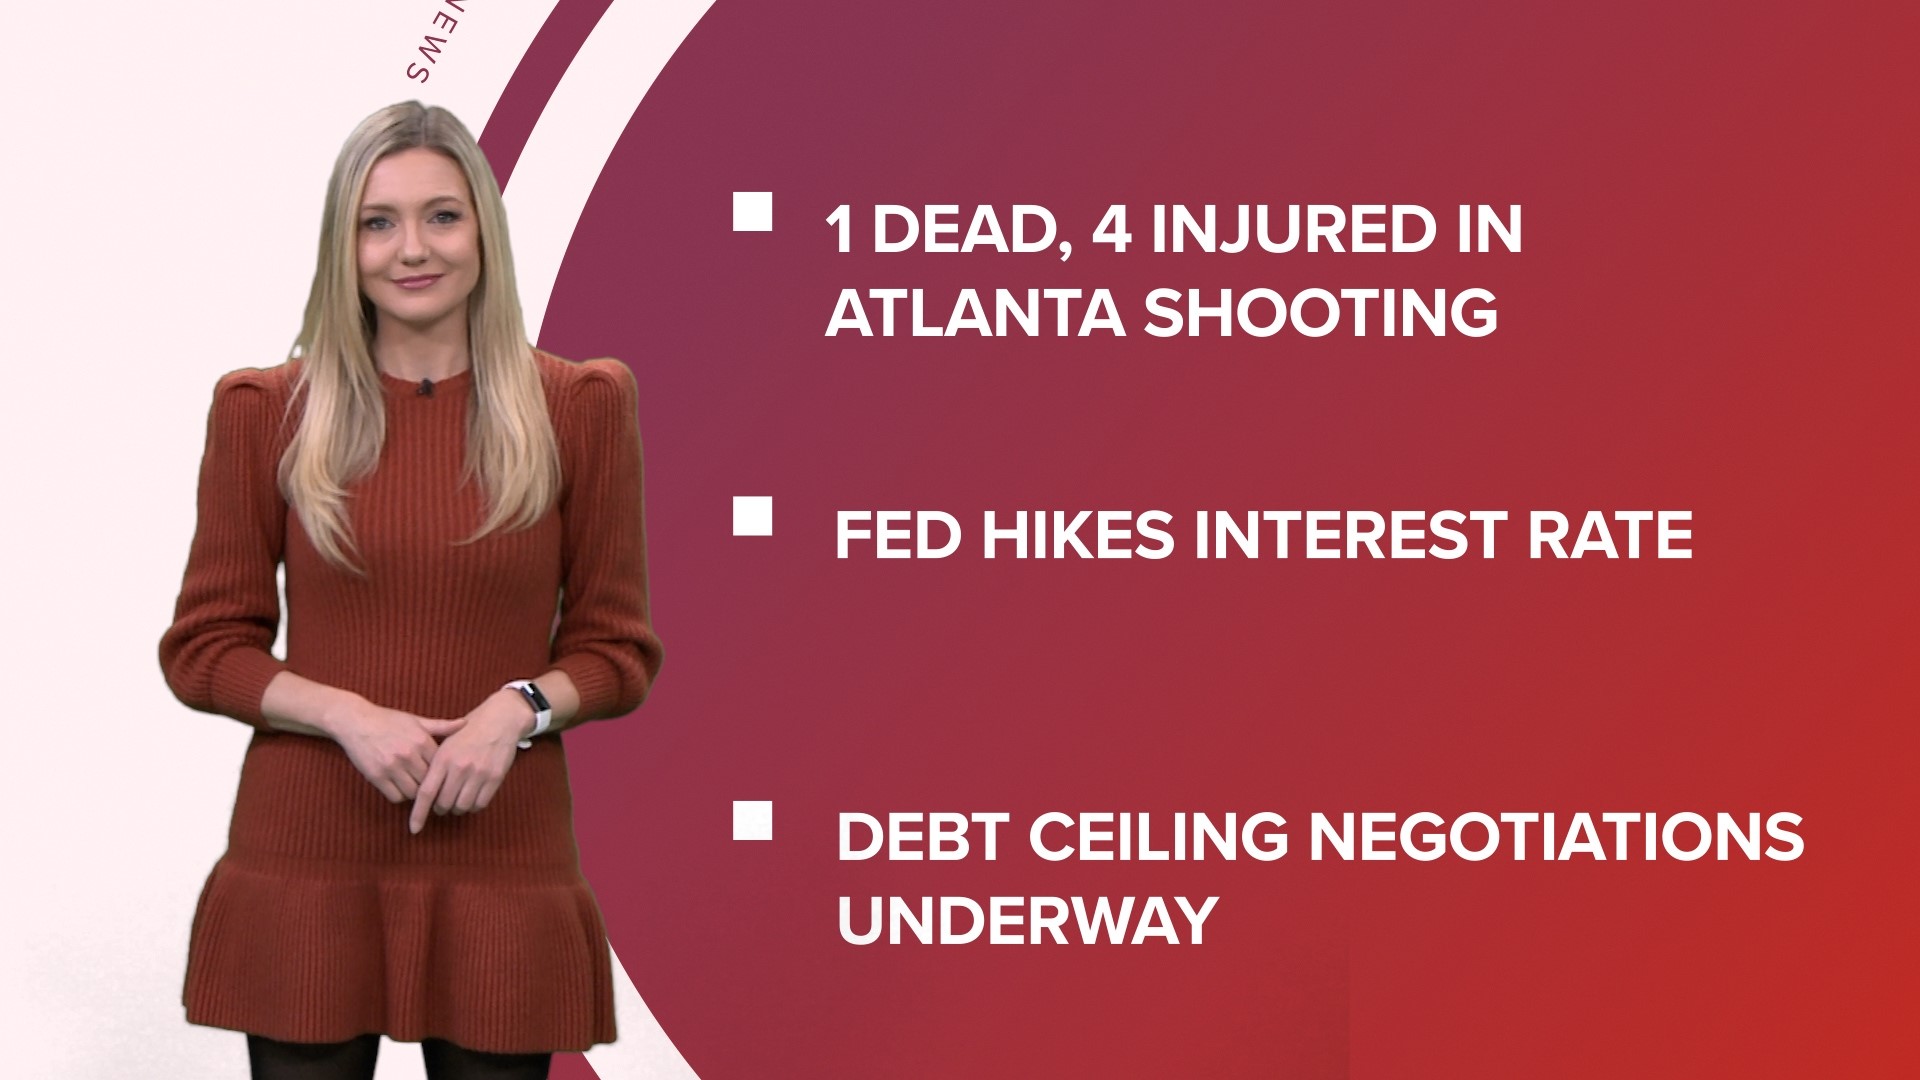 A look at what is happening in the news from an arrest in a deadly Atlanta shooting to an interest rate hike and an RSV vaccine approved.